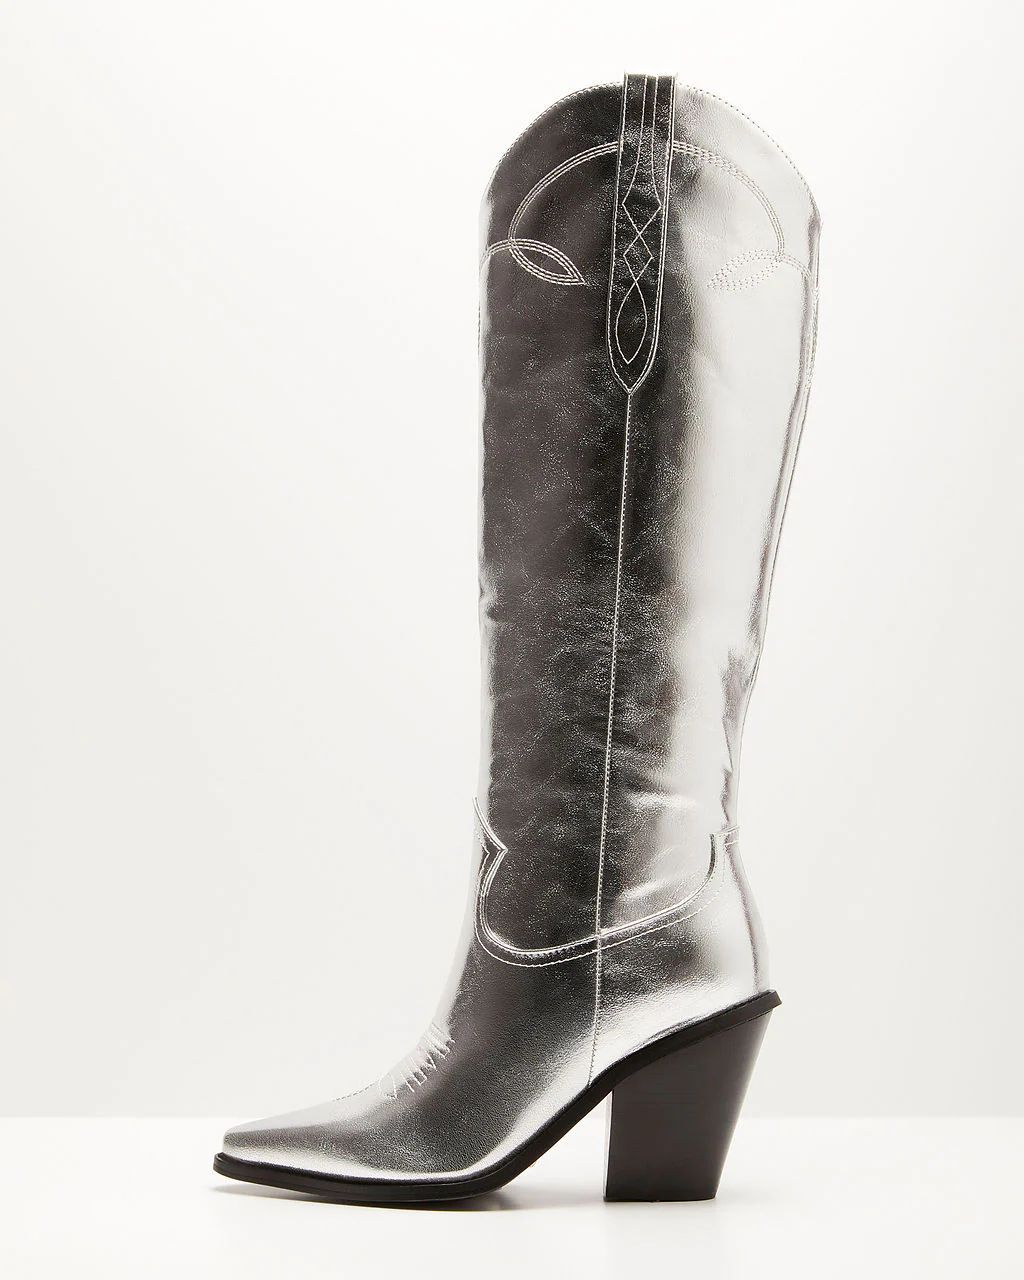 Steele Boots | VICI Collection